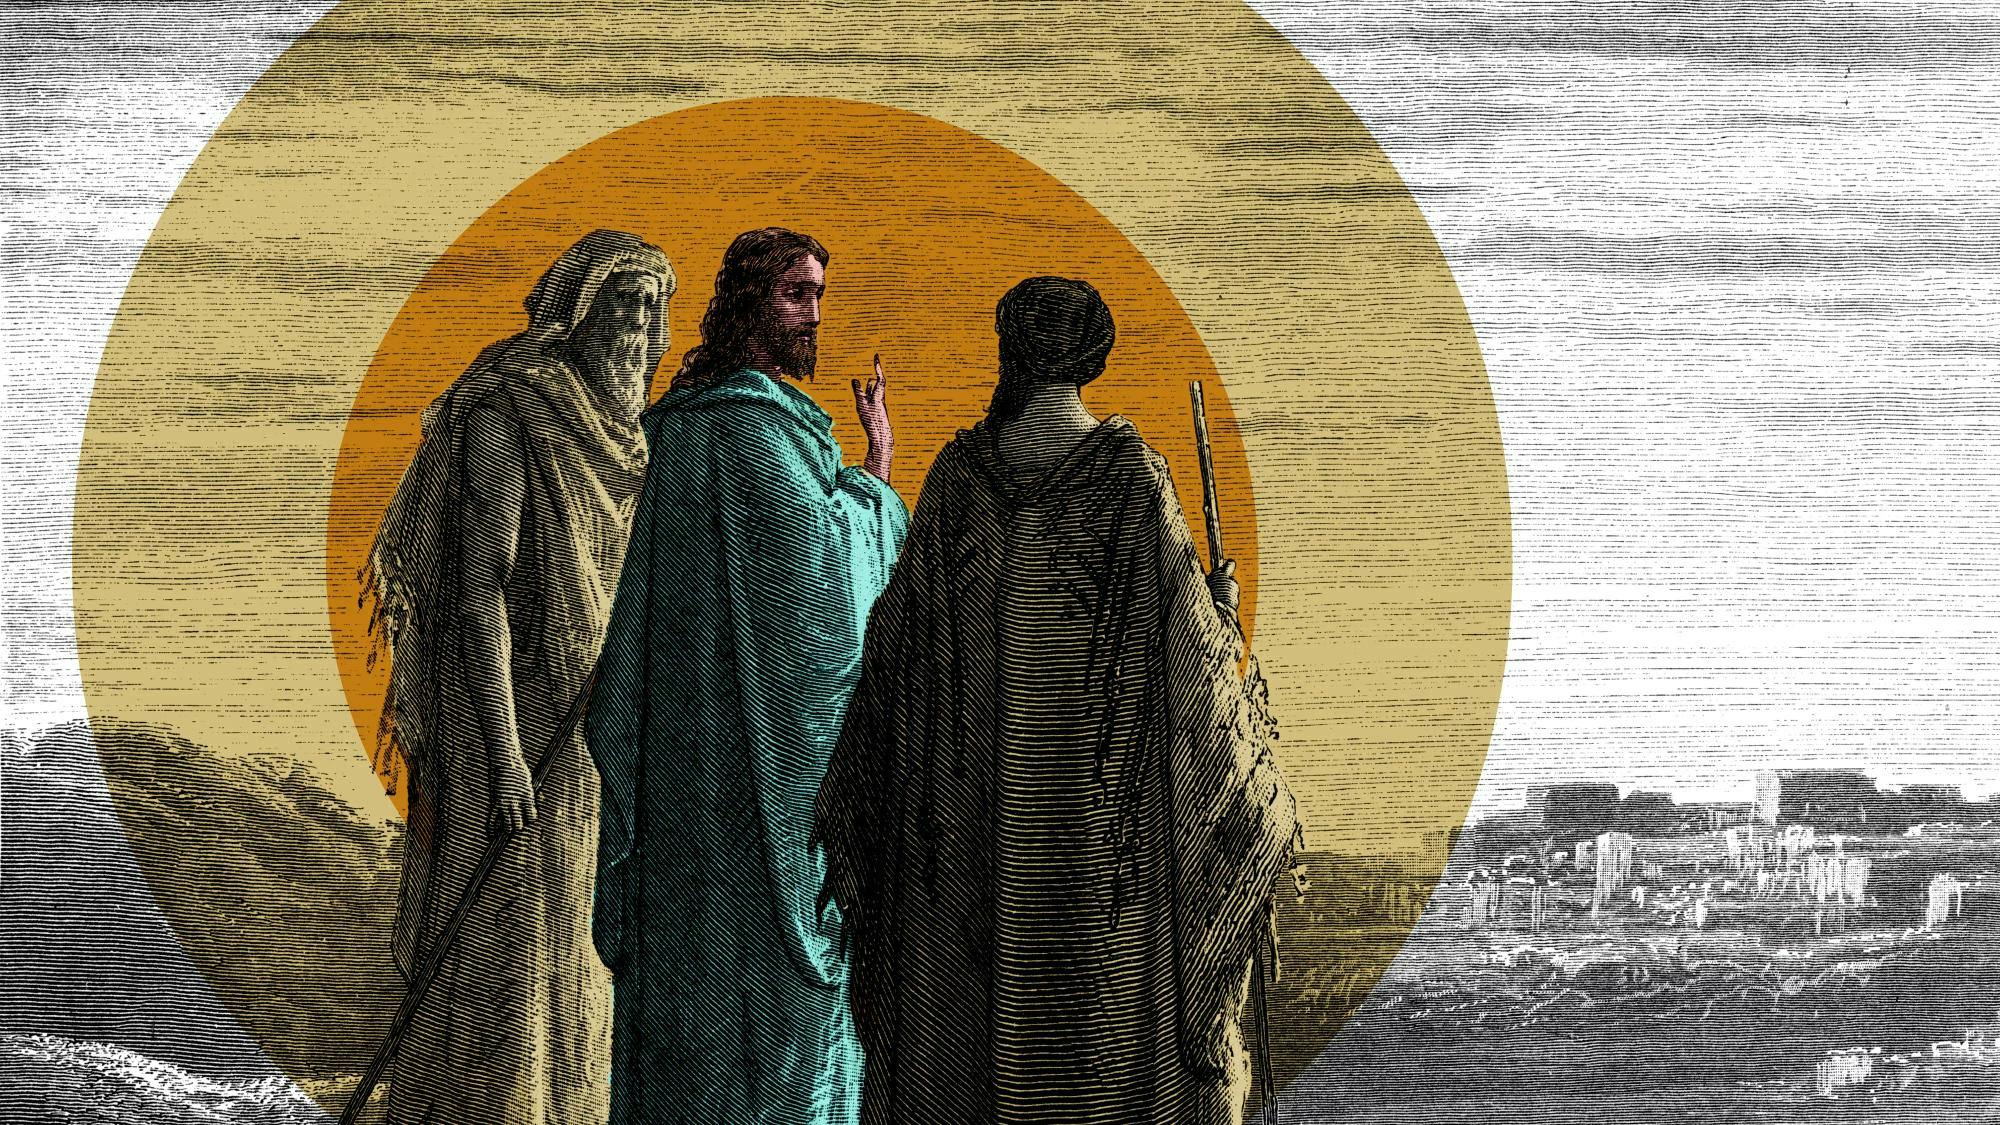 Christ walking on the road to Emmaus with disciples